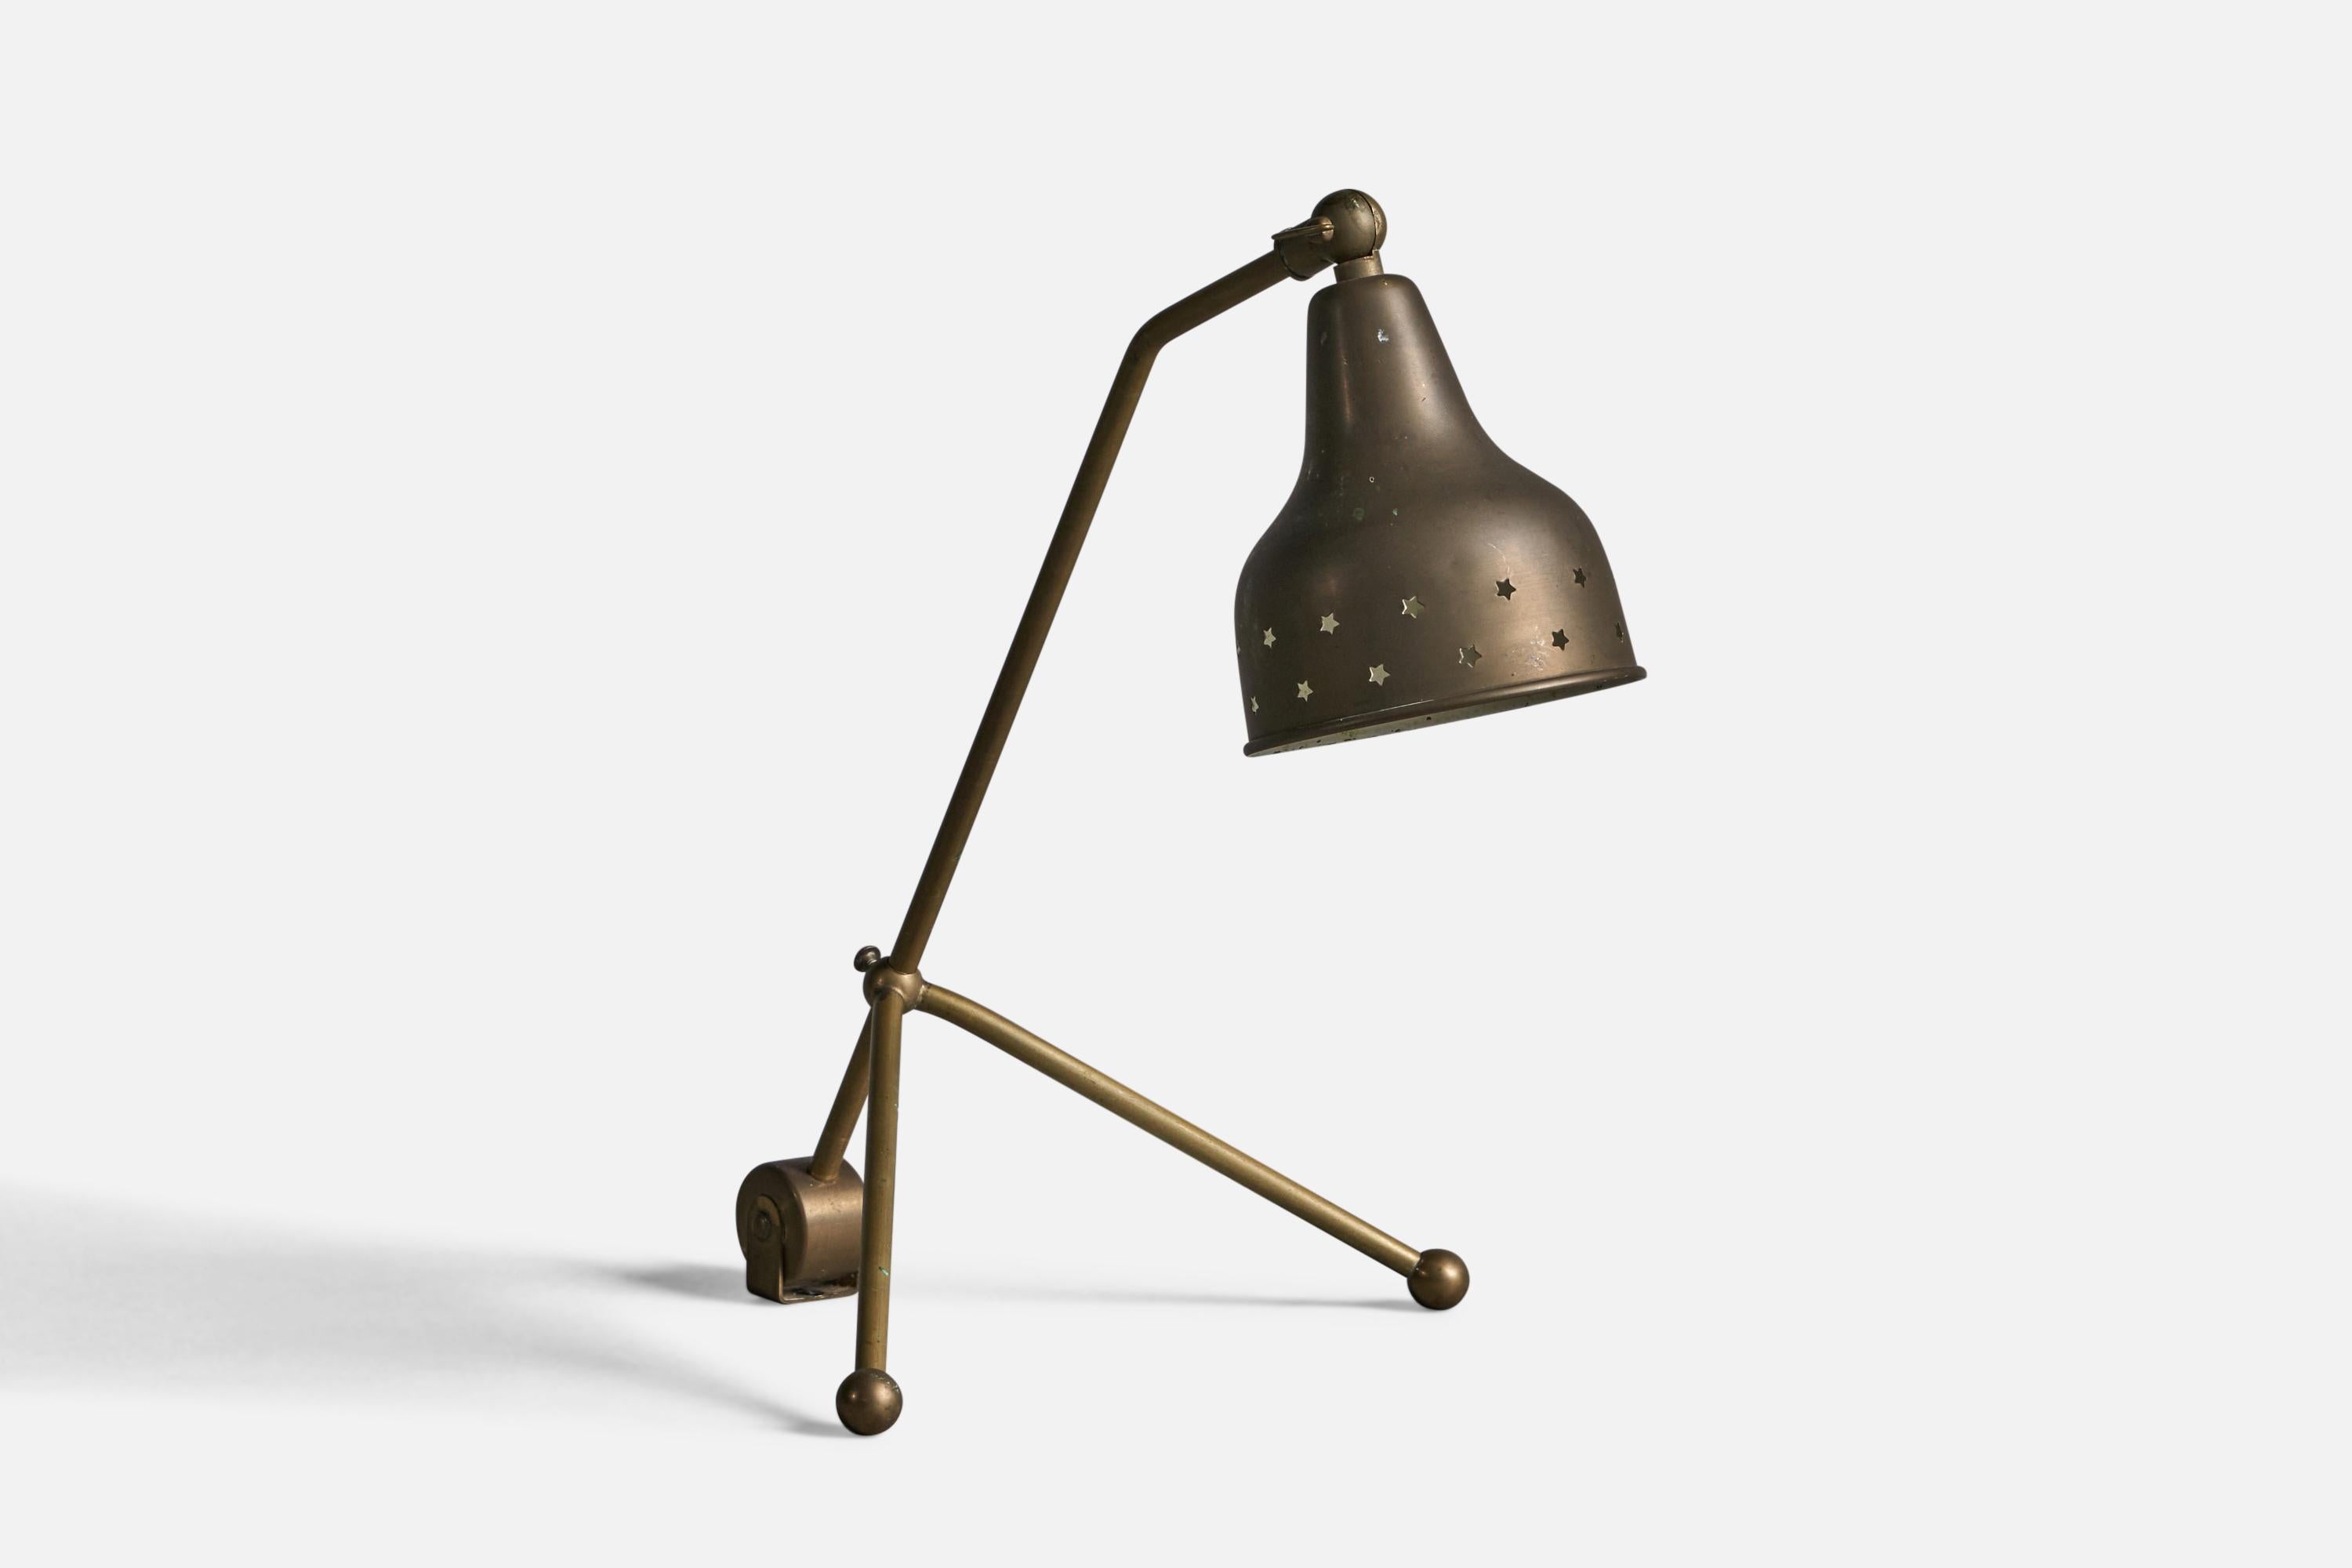 An adjustable brass table lamp designed and produced by Svend Aage Holm Sørensen, Denmark, 1950s.

Overall Dimensions (inches): 12.25